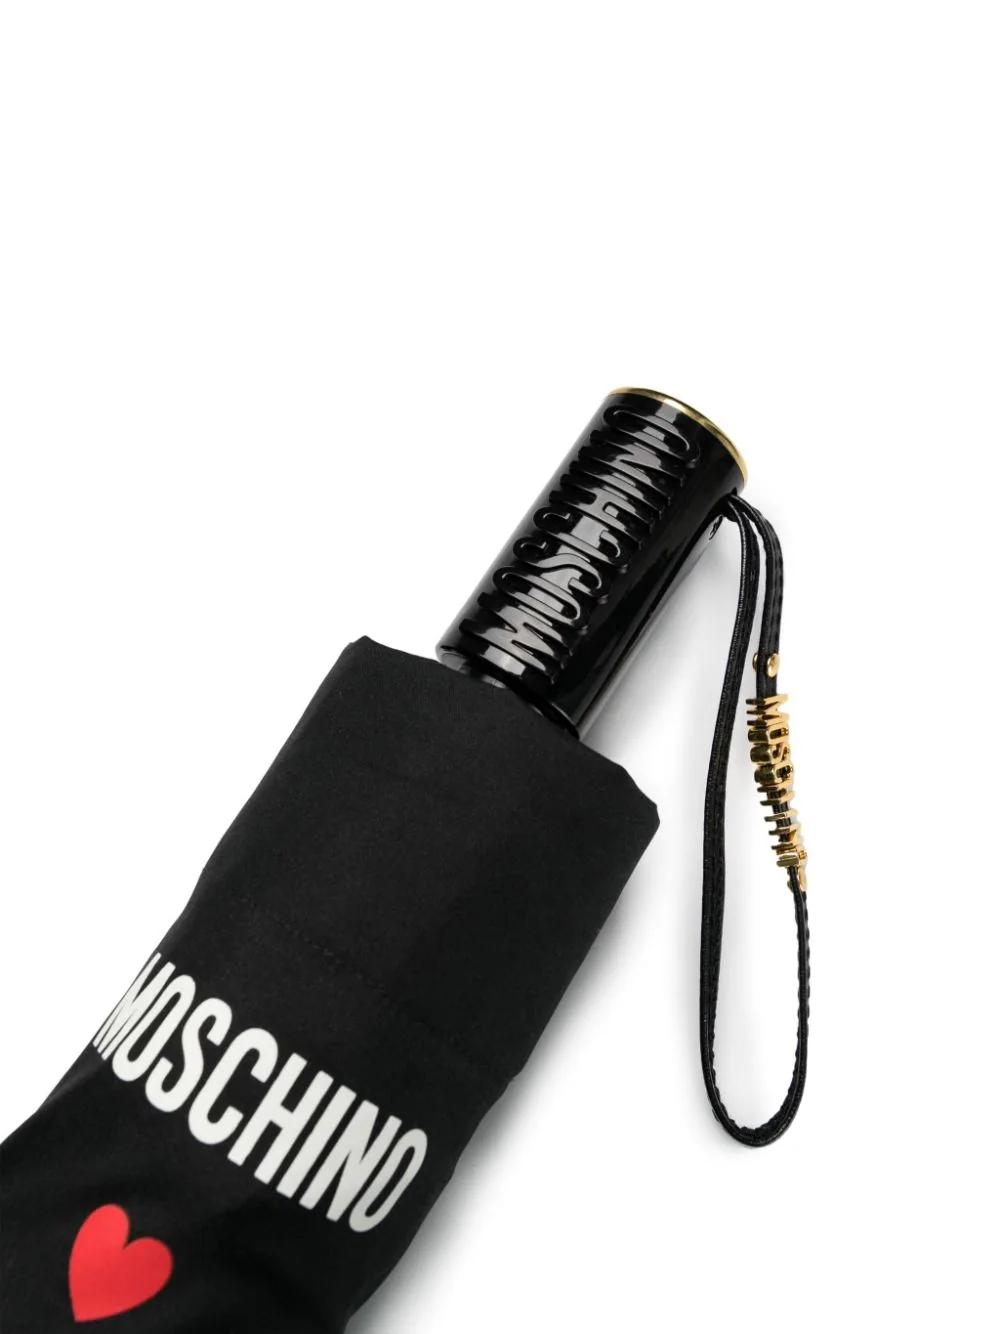 Paraguas Moschino In love we trust A Negro